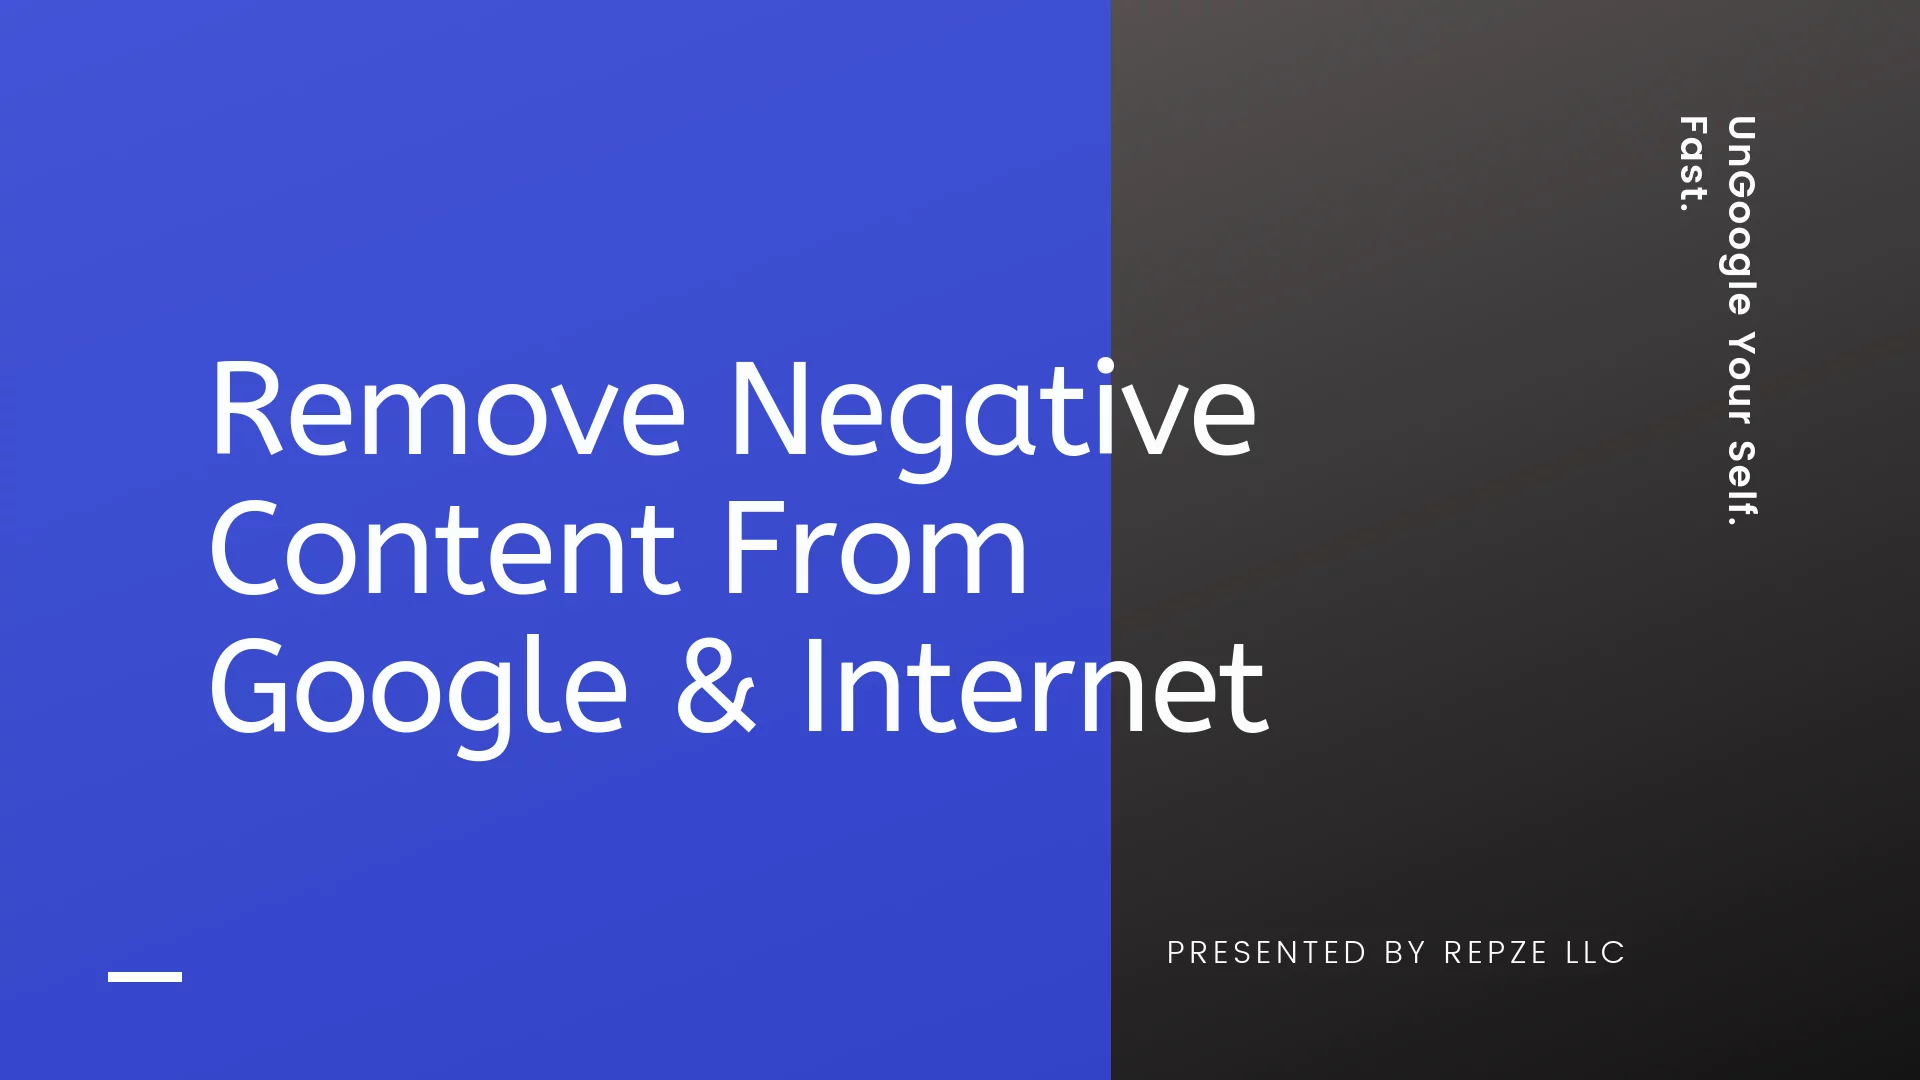 How to Remove Negative Content From Google & Internet